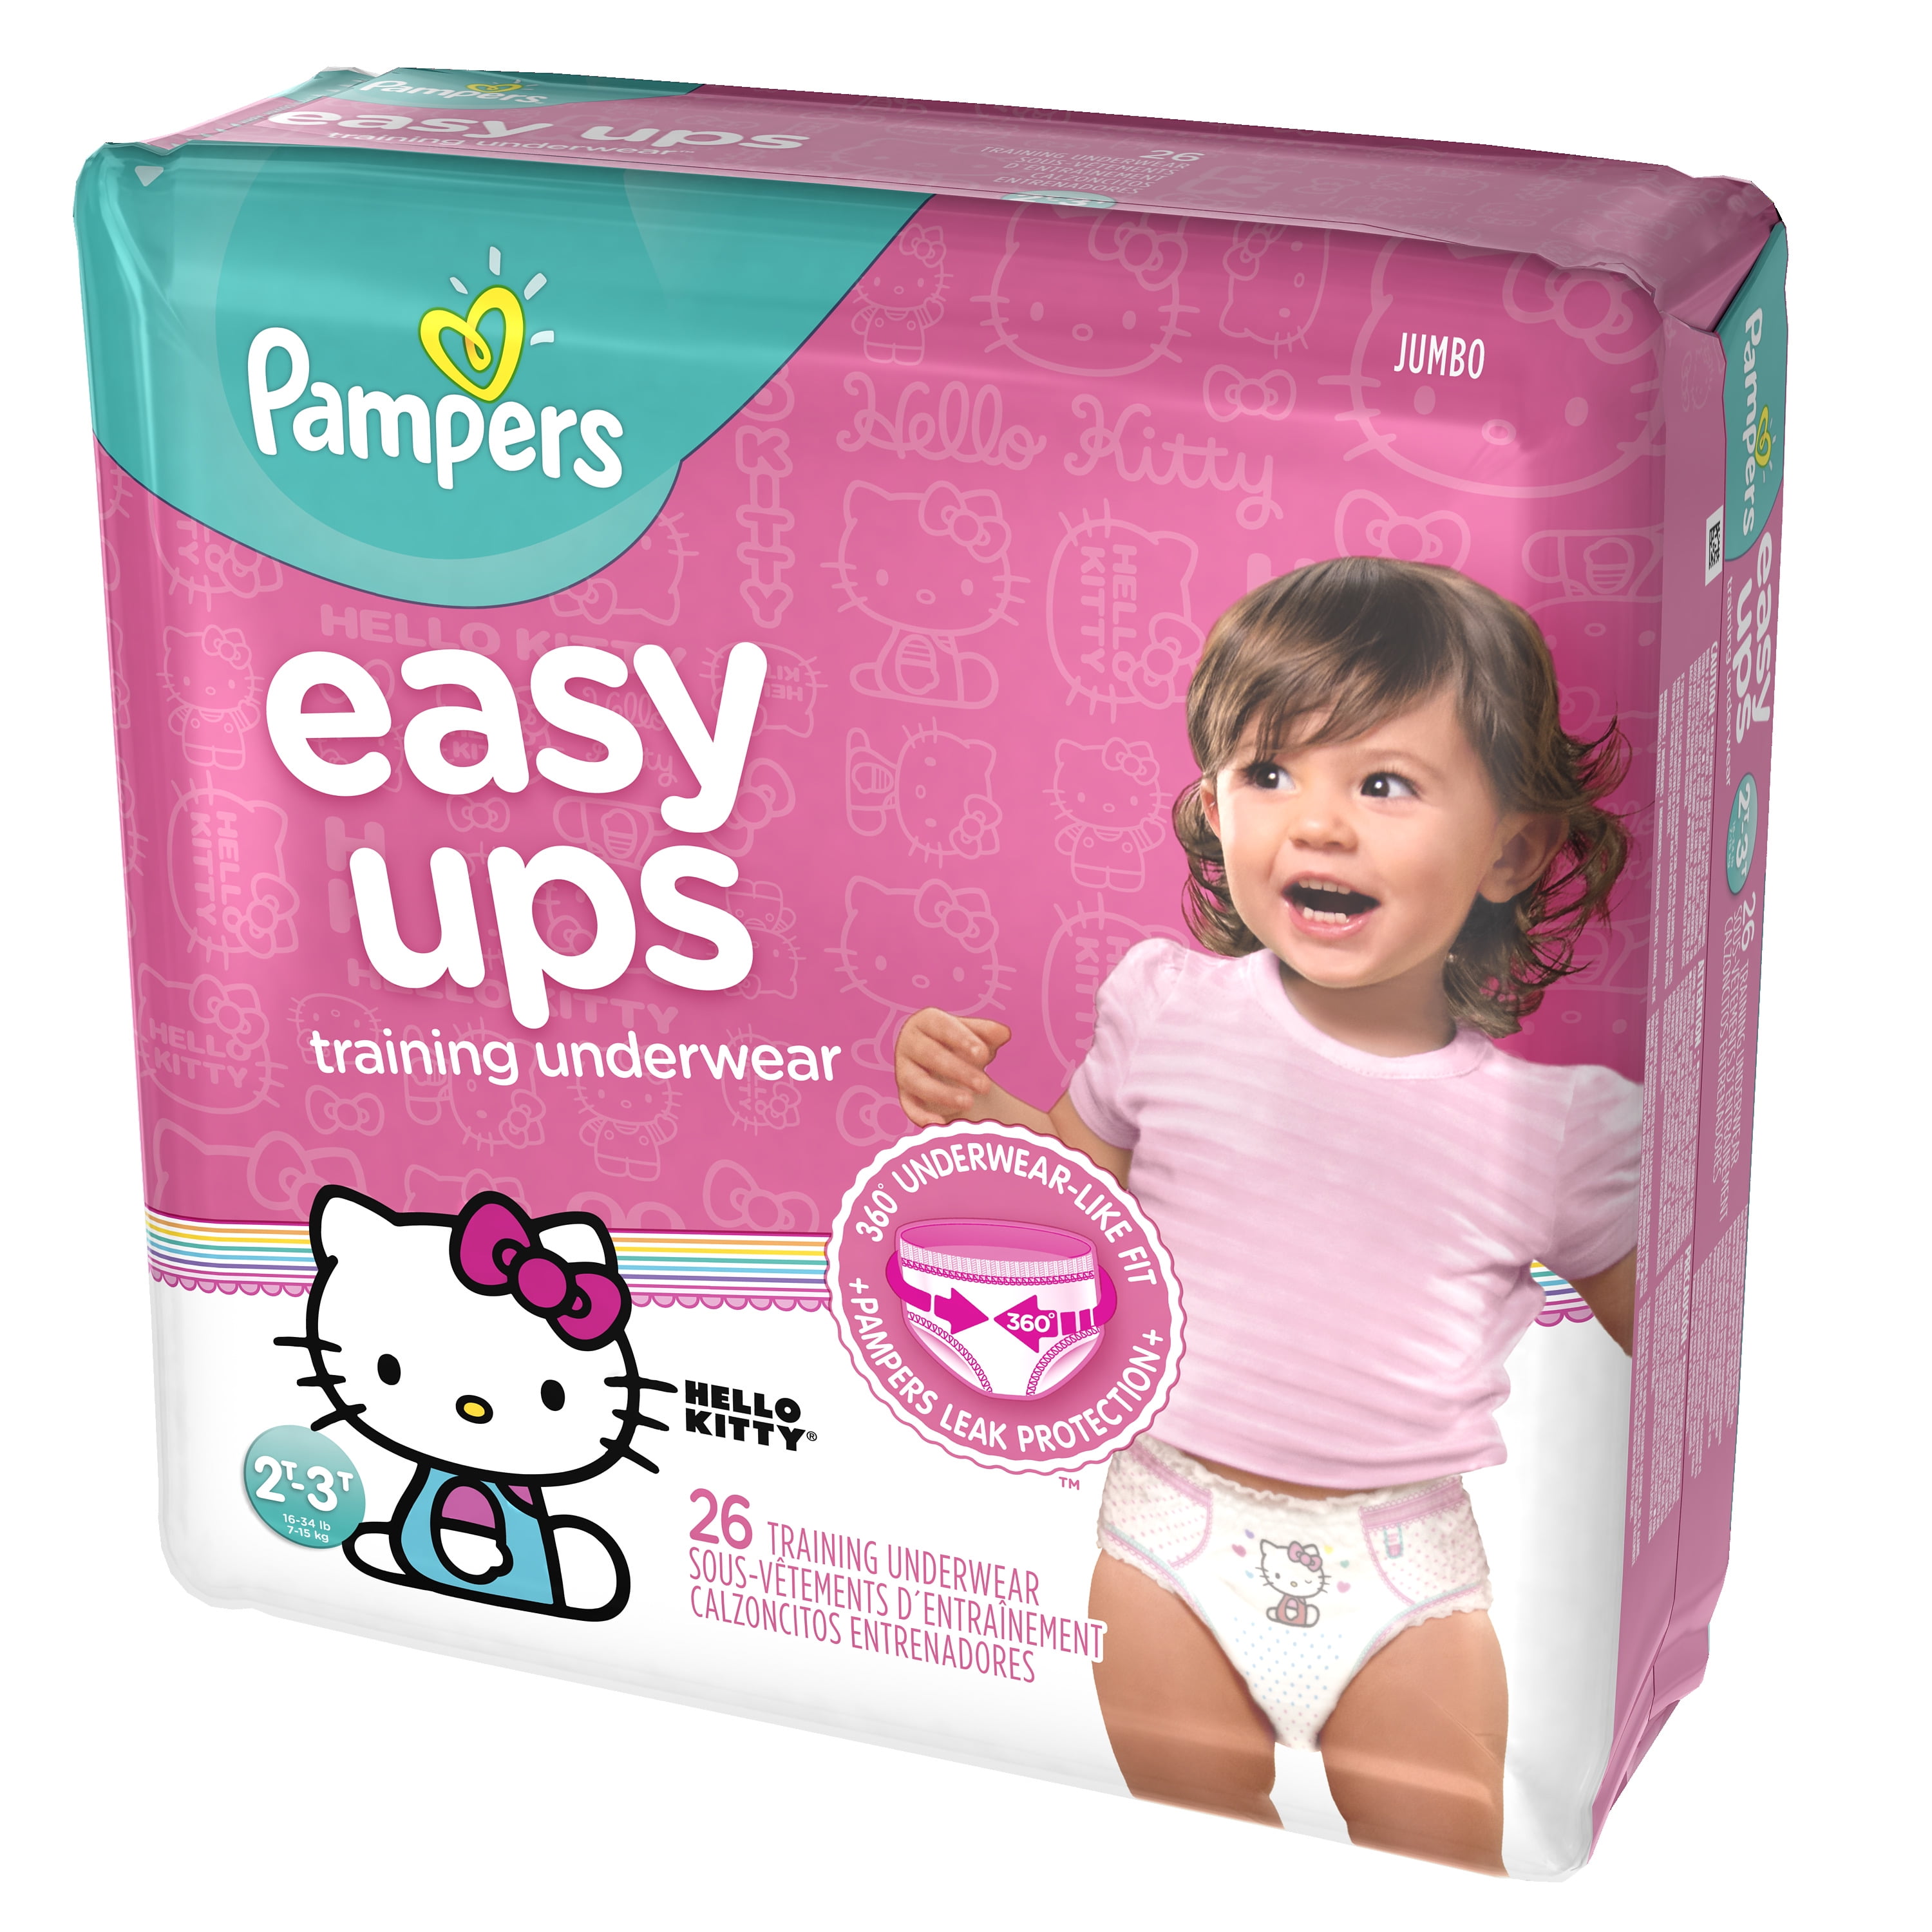 Pampers Easy Ups Training Underwear Girls Size 4 2t 3t 26 Count